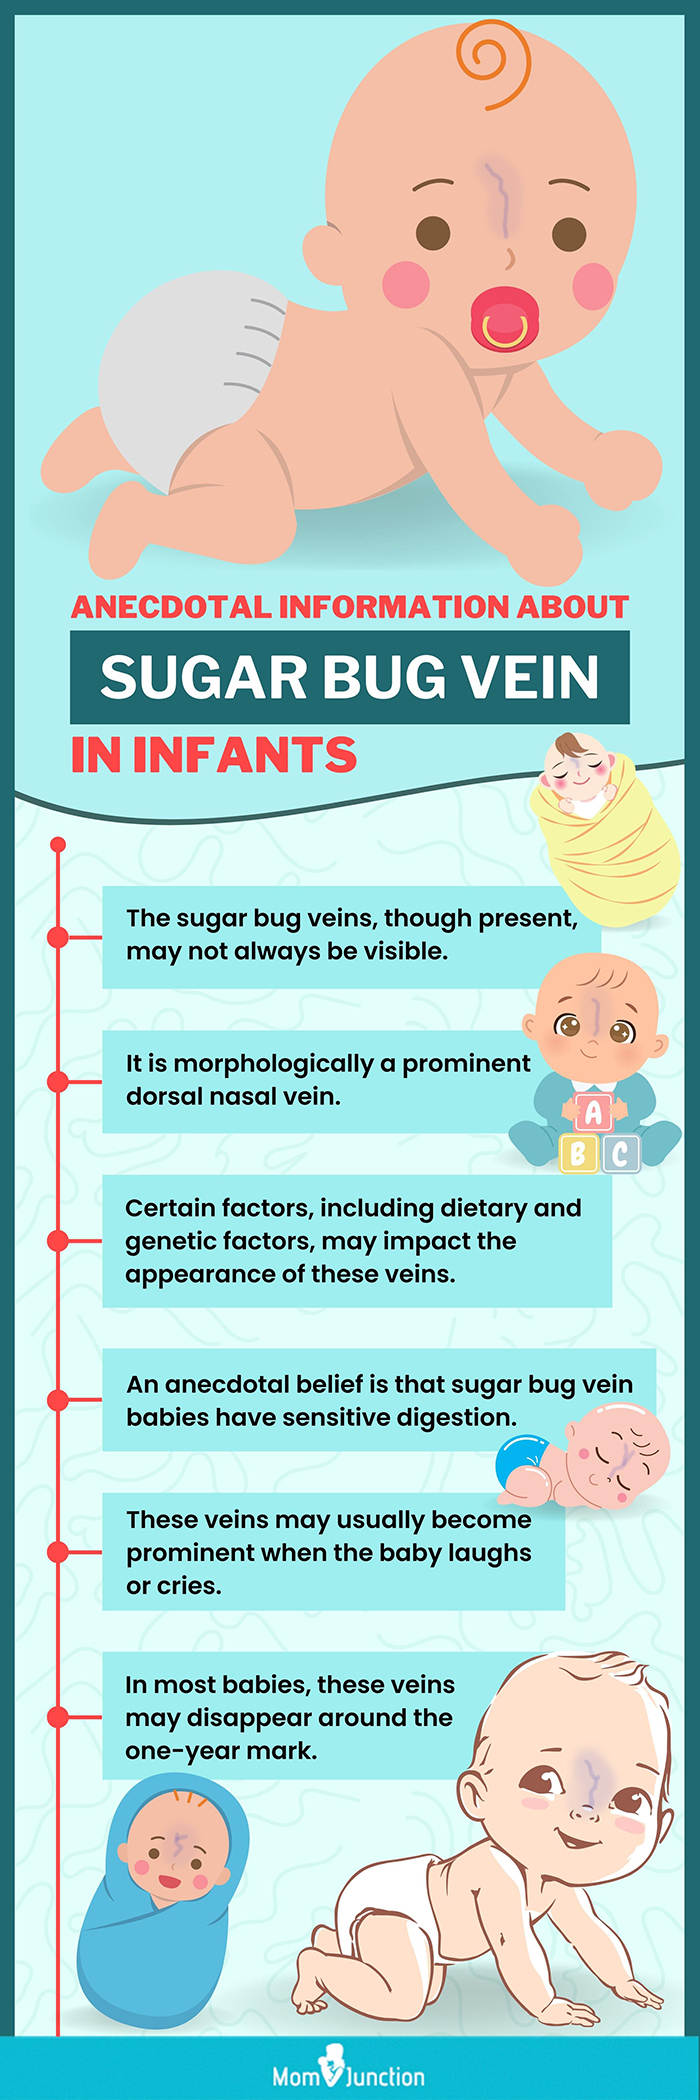 anecdotal information about sugar bug vein in infants [infographic]